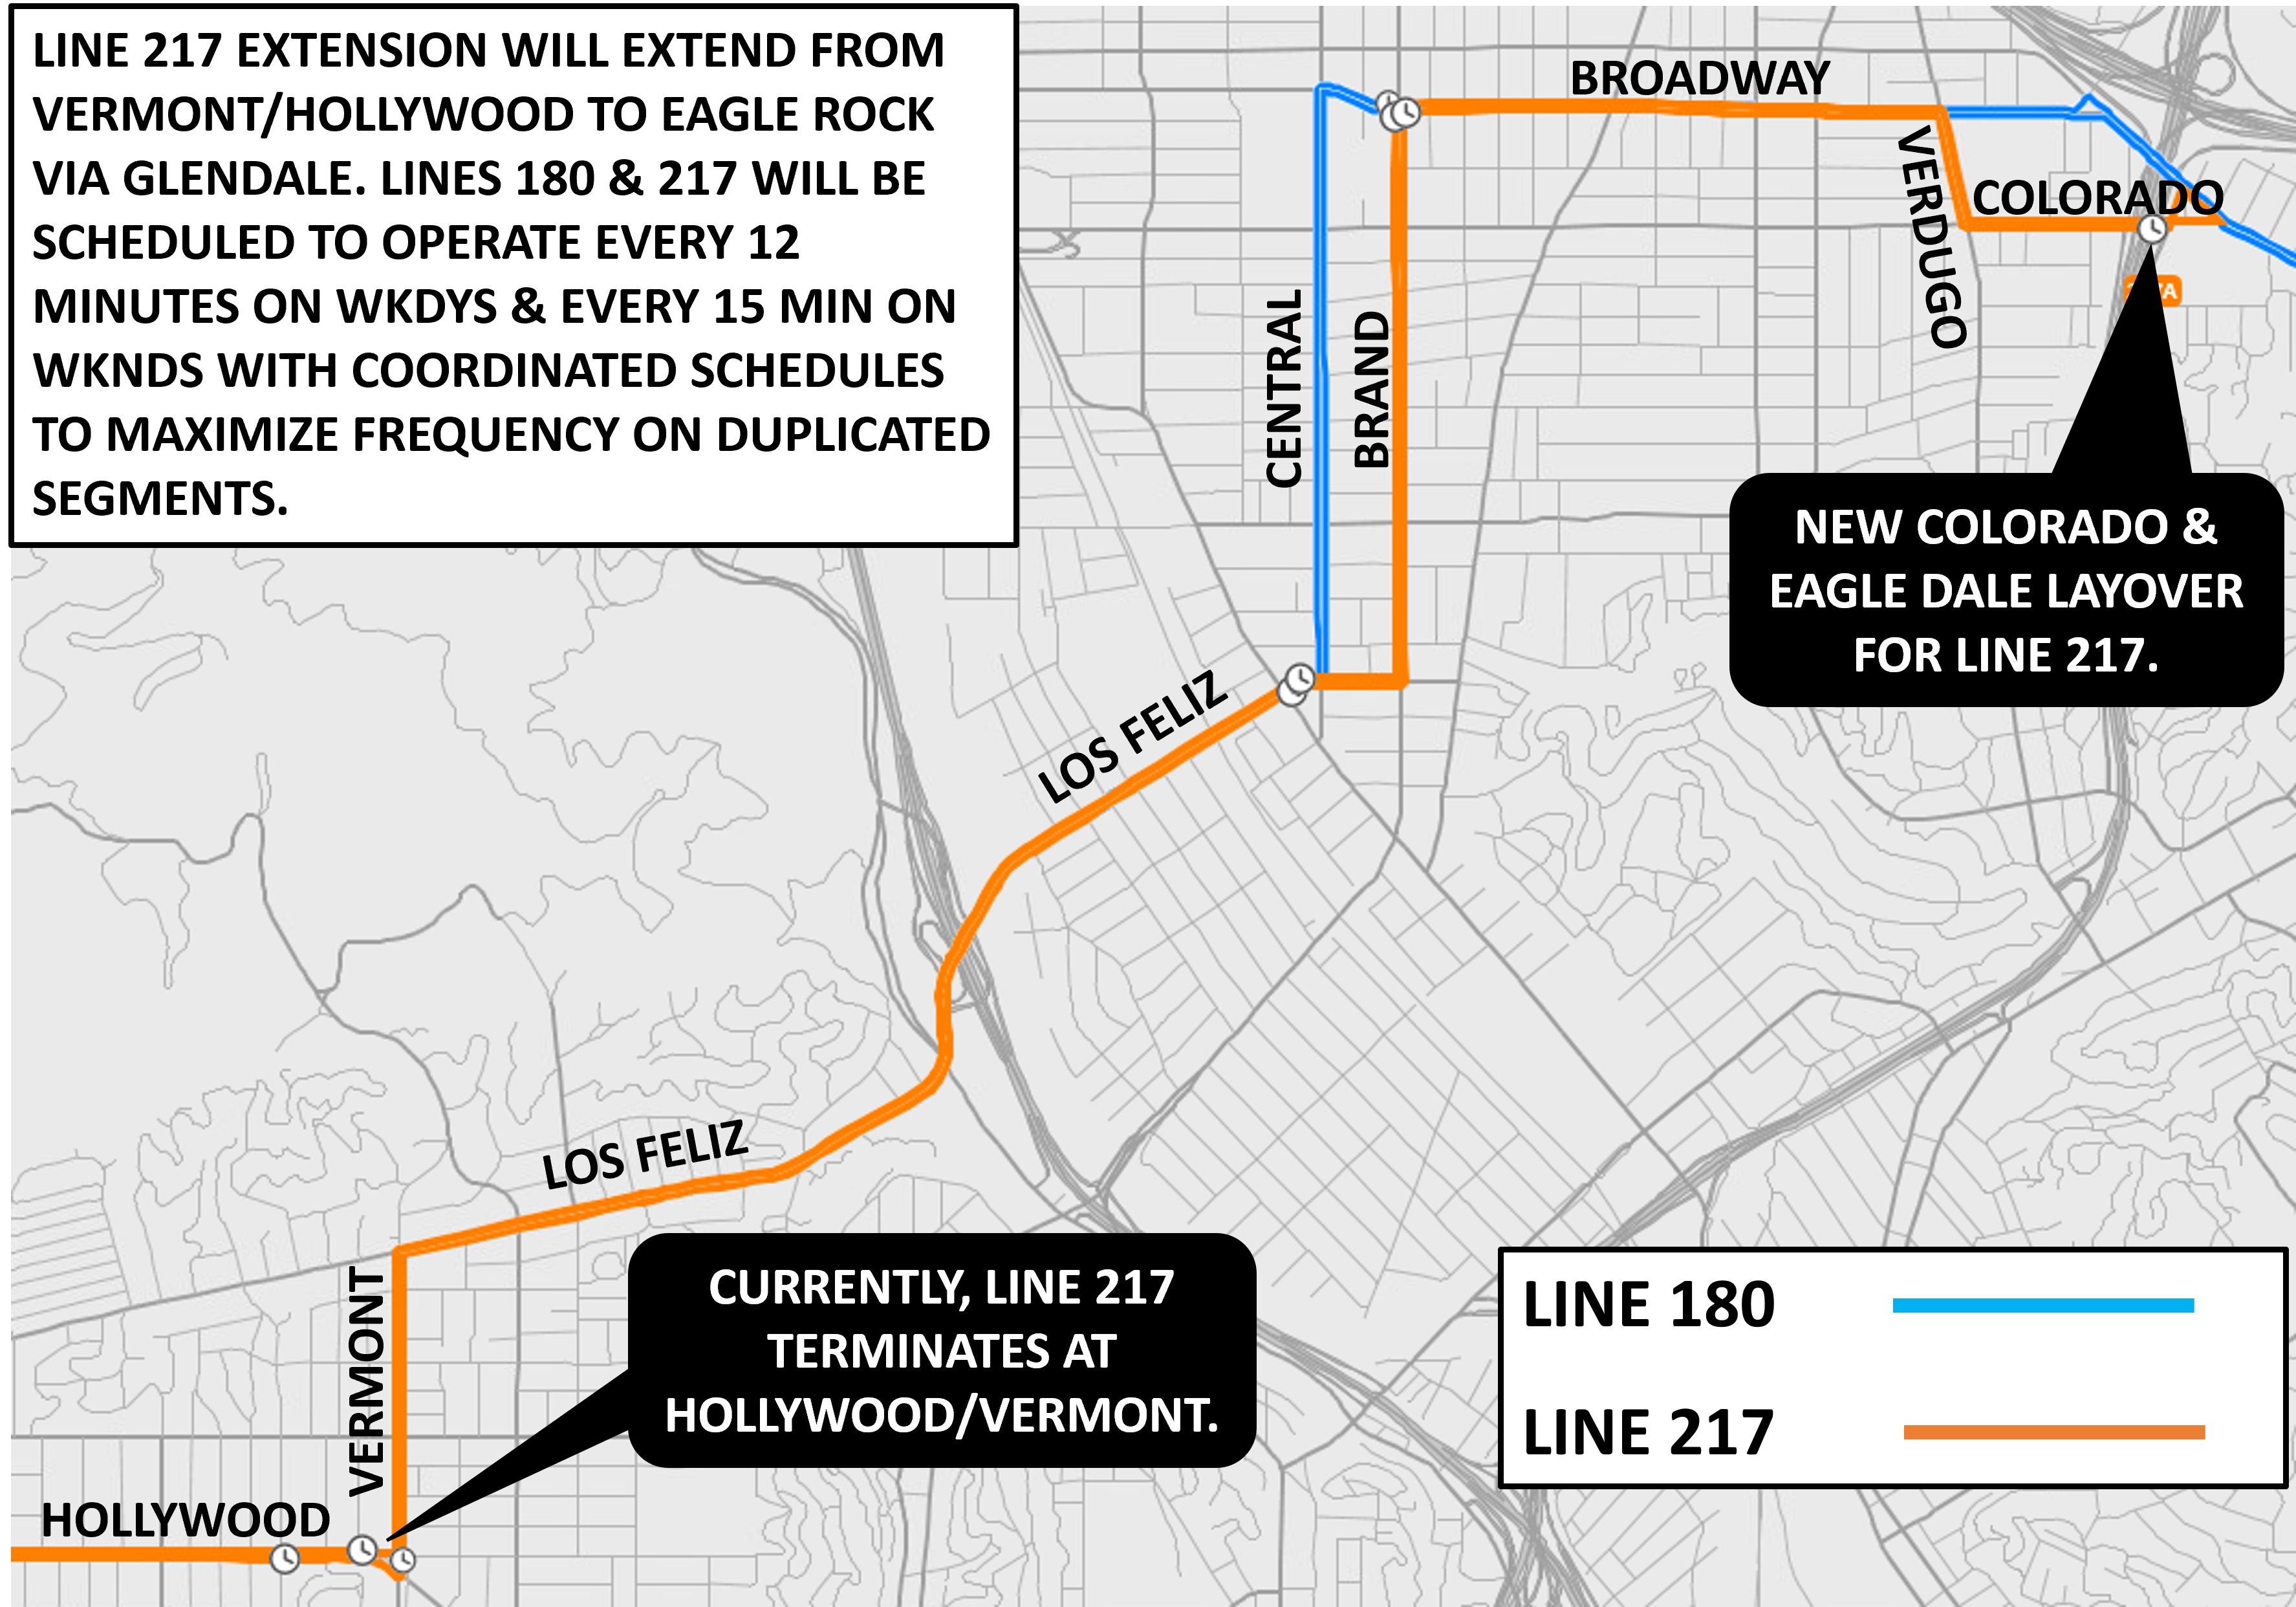 a graphic map showing a visual representation of the described changes to Line 217